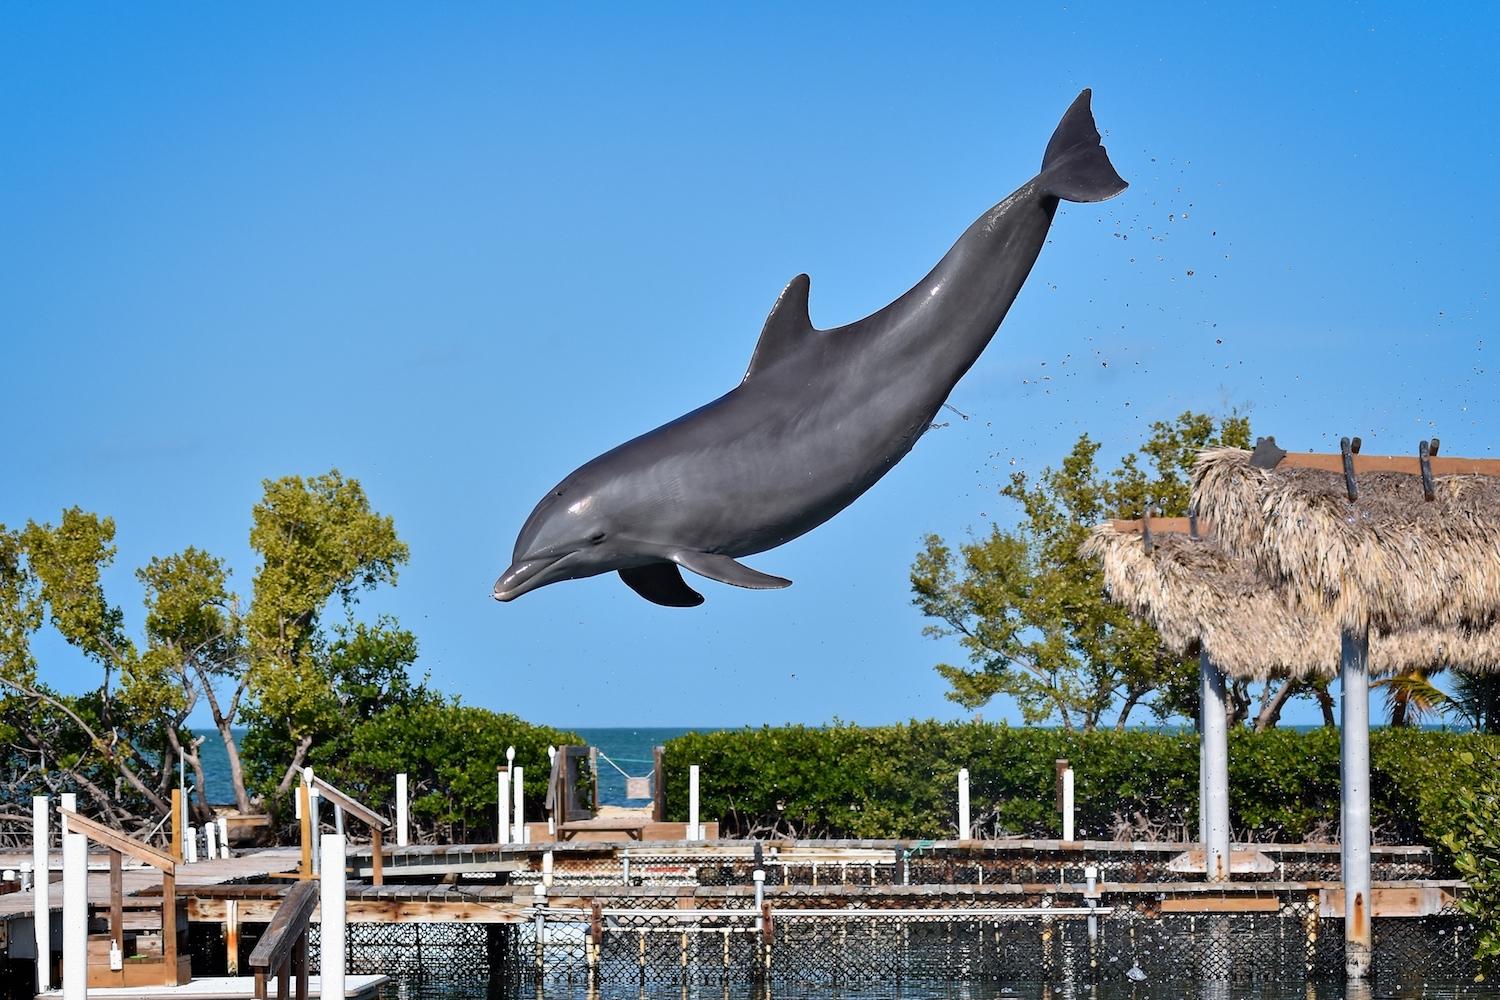 Dolphin seen leaping out of water